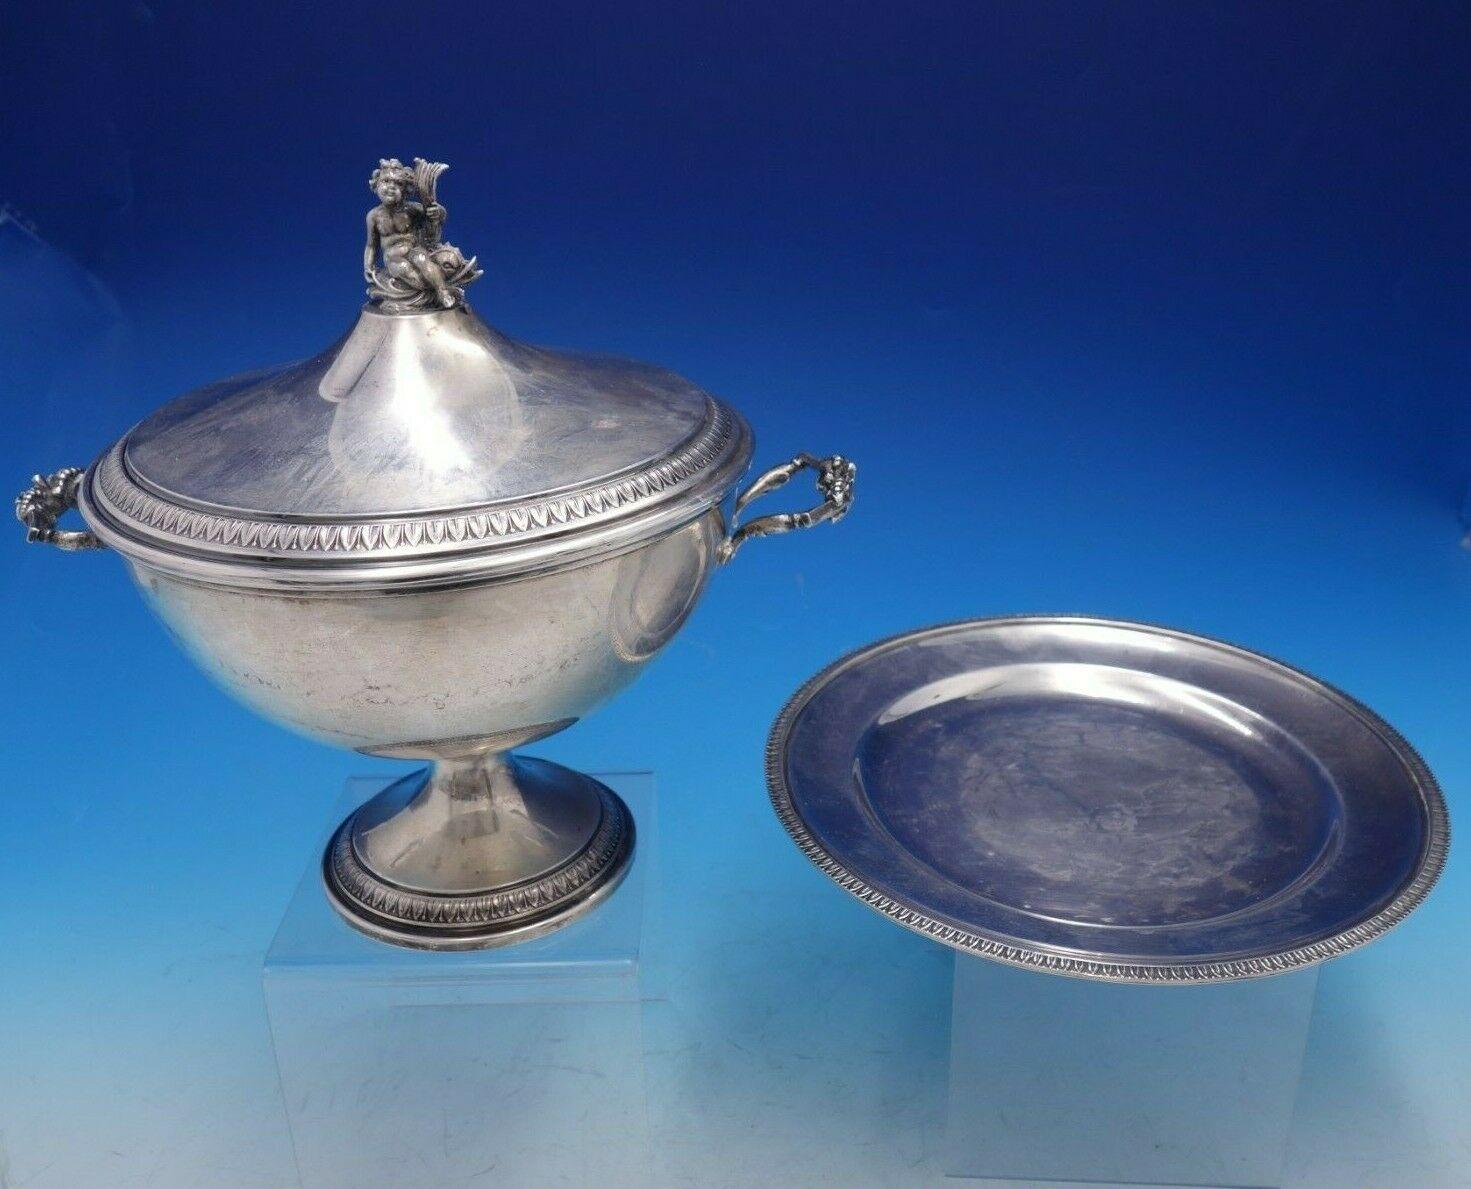 Italian silver

Fabulous vintage figural Empire Italian 800 silver soup tureen with underplate. The tureen with figural finial depicting a cherub sitting atop a dolphin measures 10 3/4